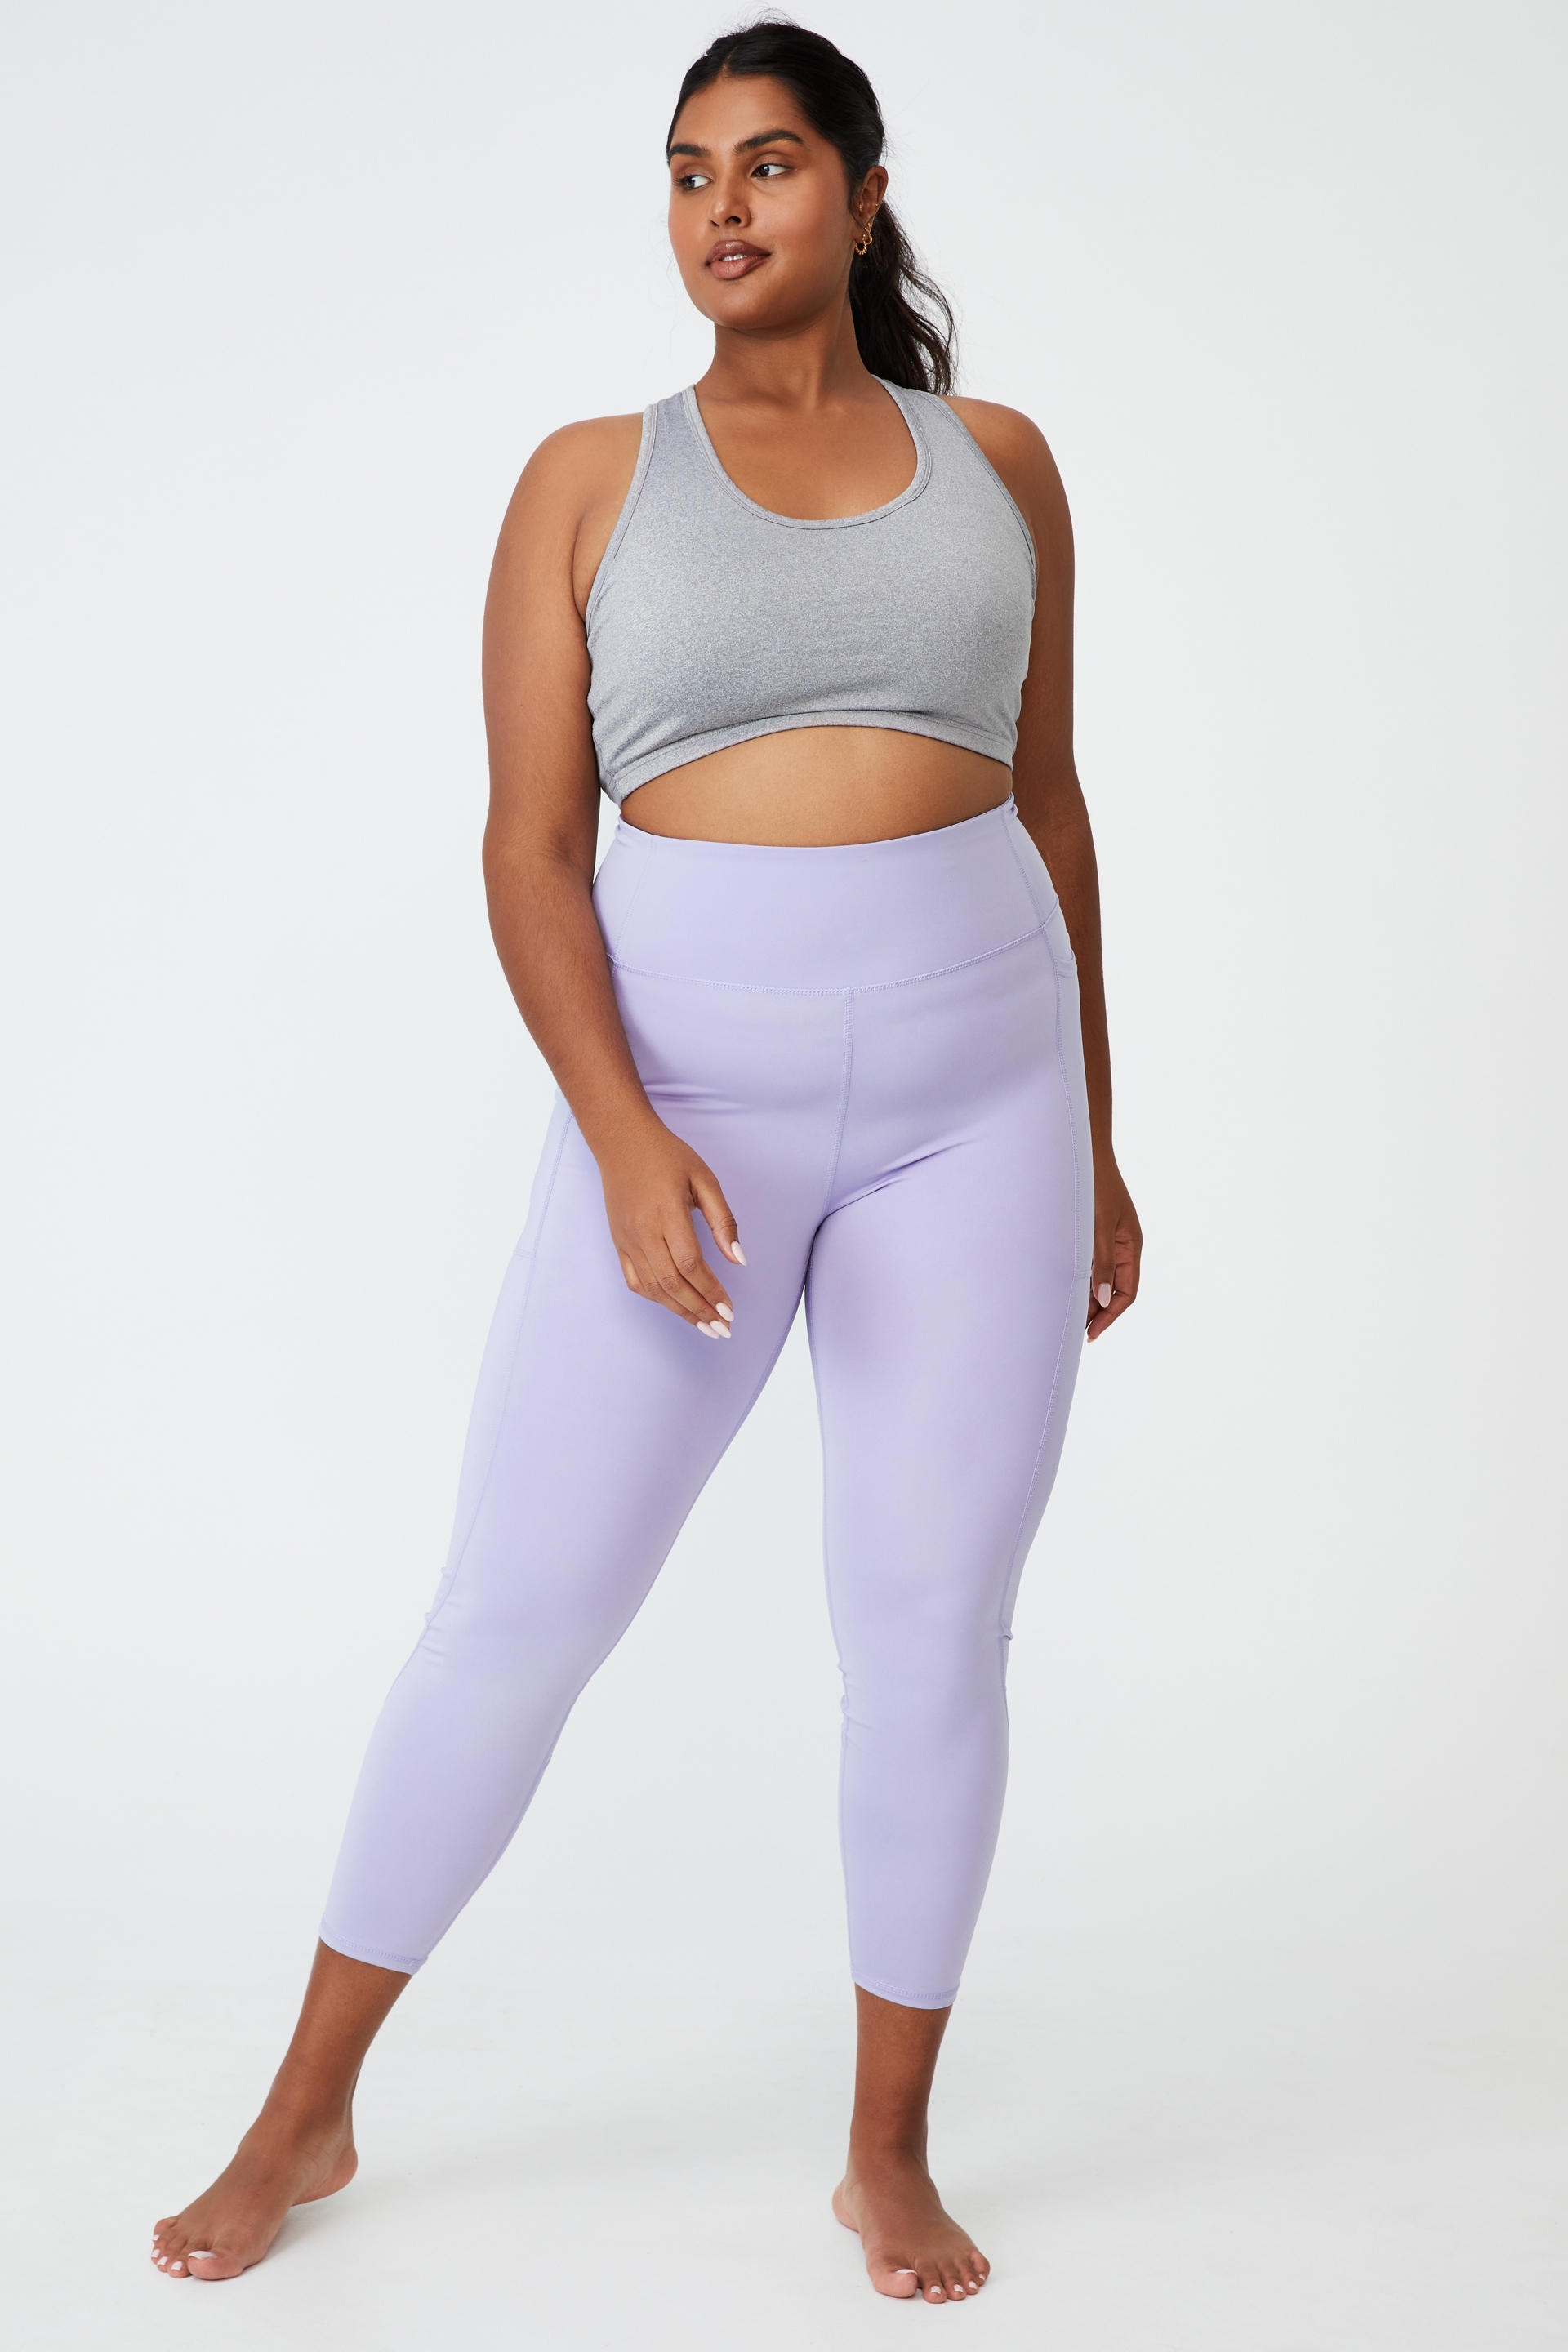 Cotton On Women - Curve Lifestyle Pocket 7/8 Tight - Chalky lavender